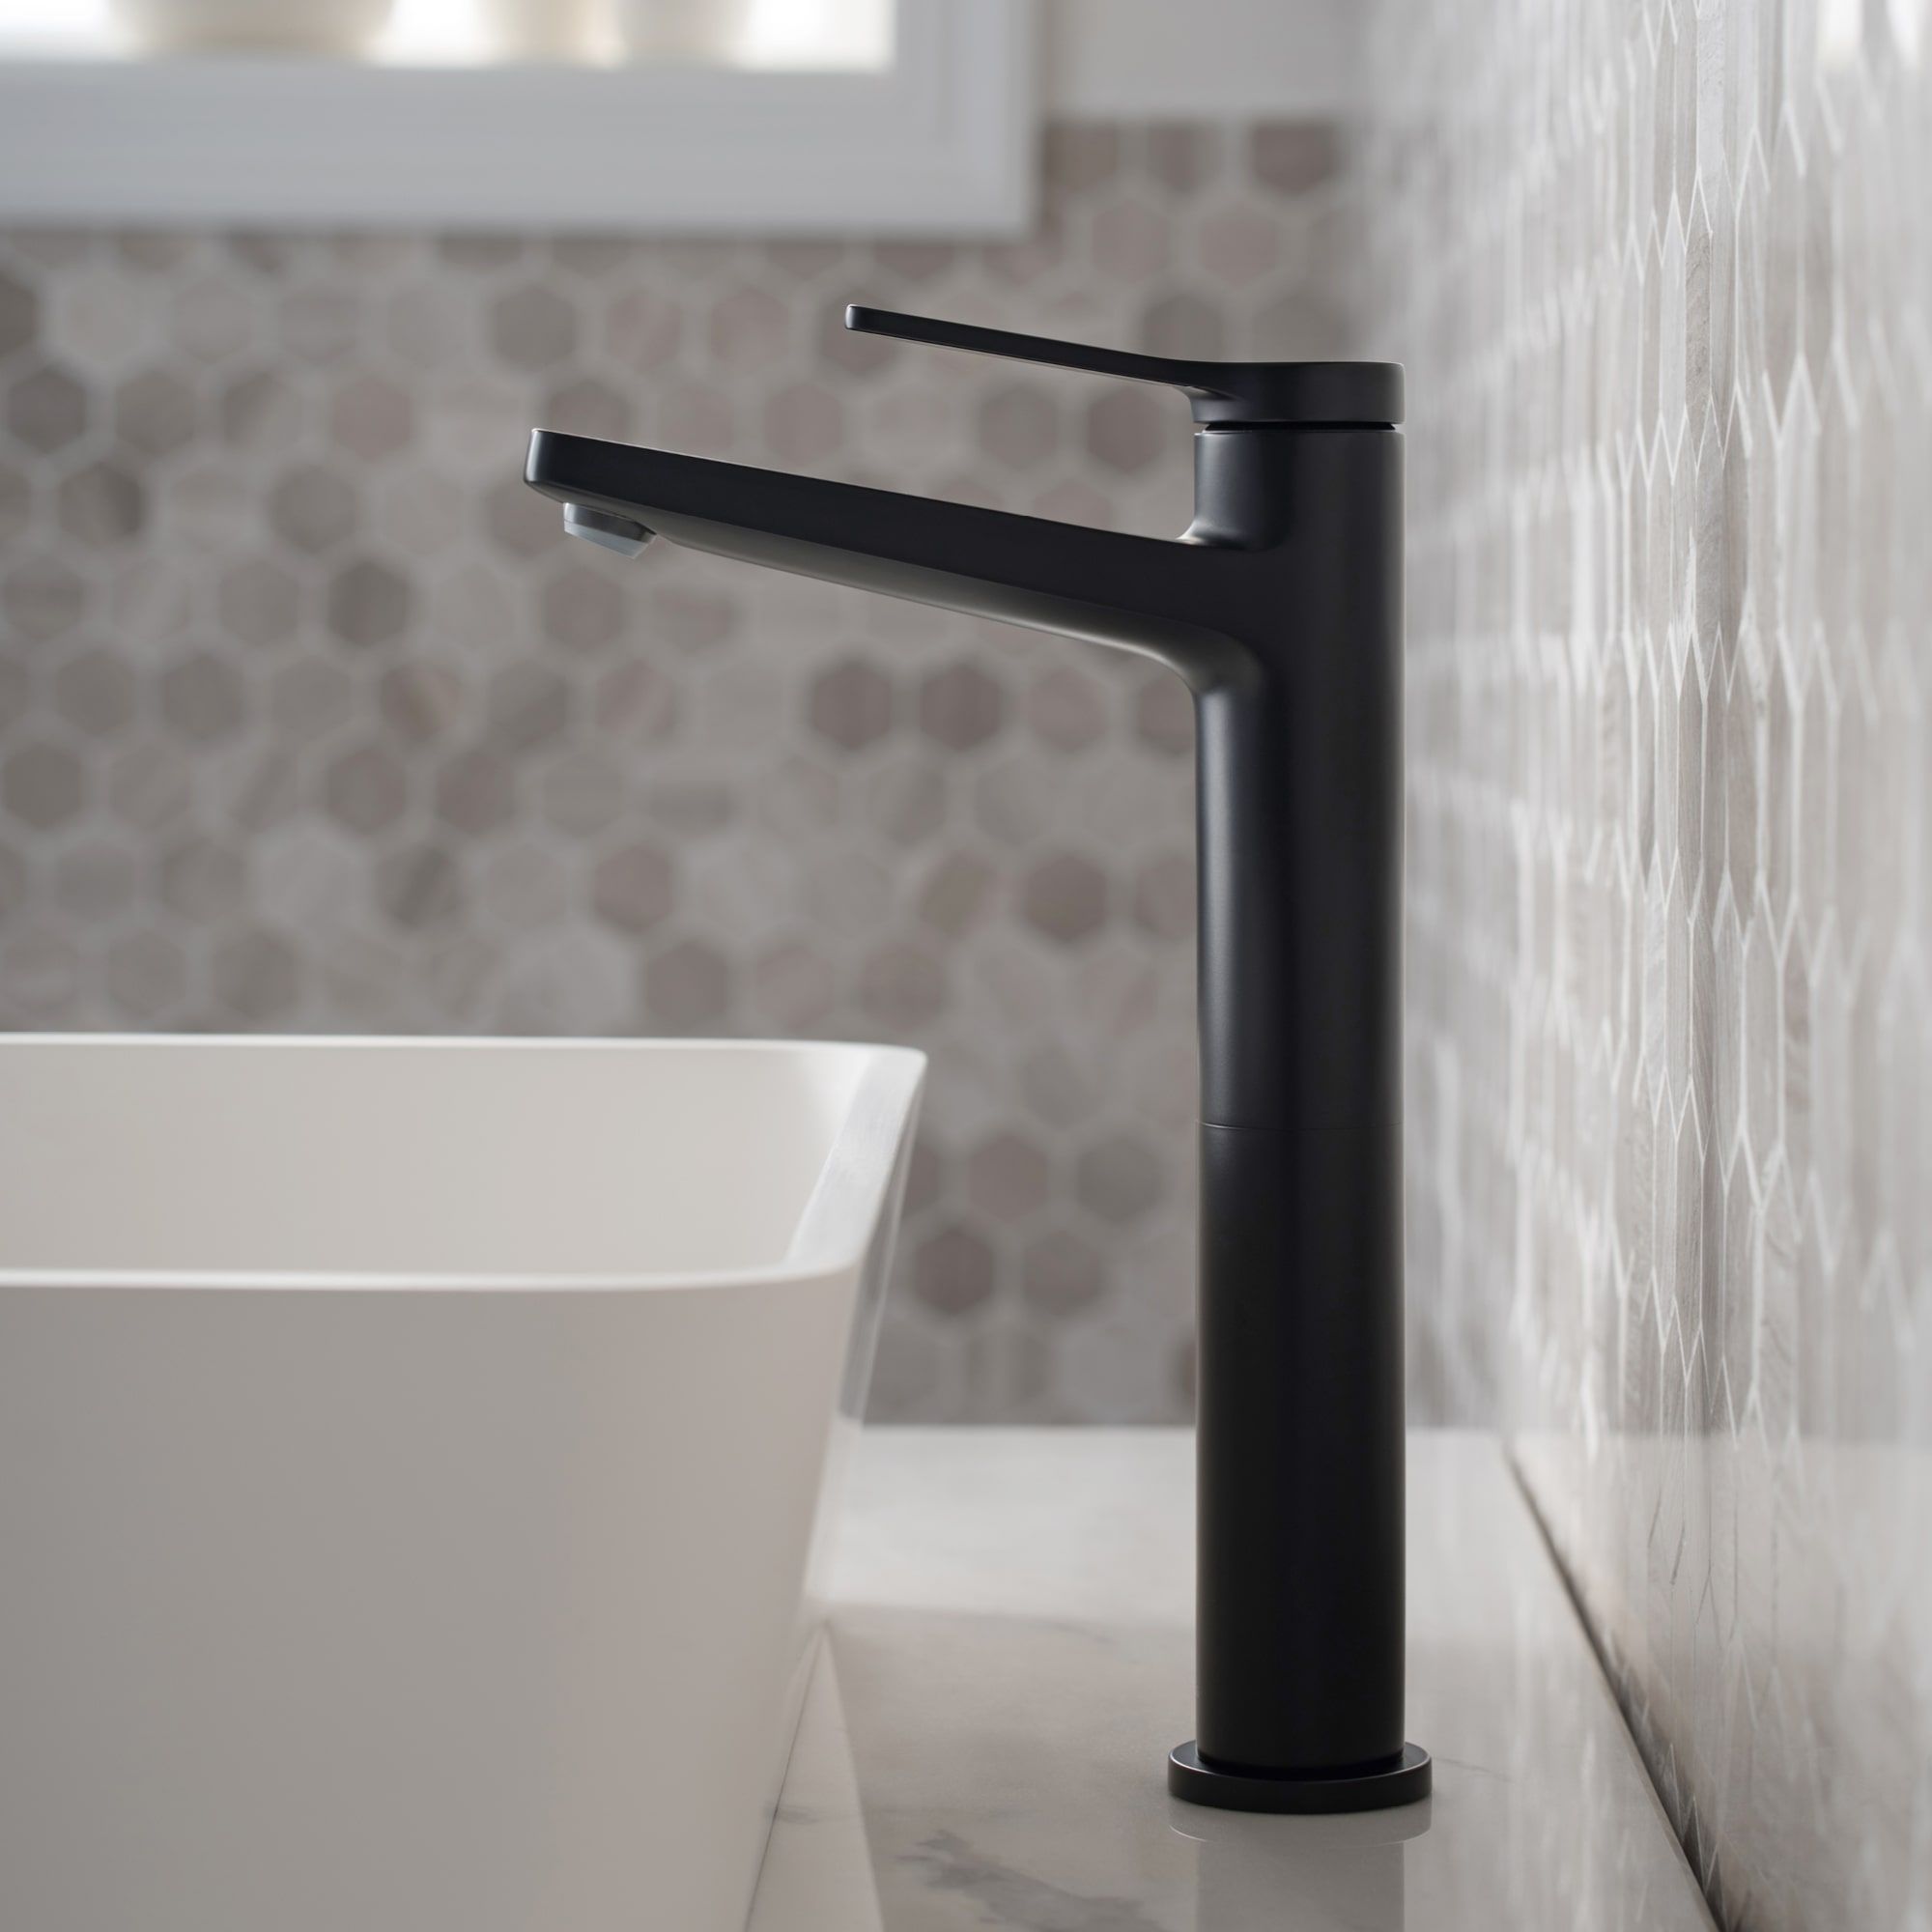 Give your bathroom a touch of pure comfort